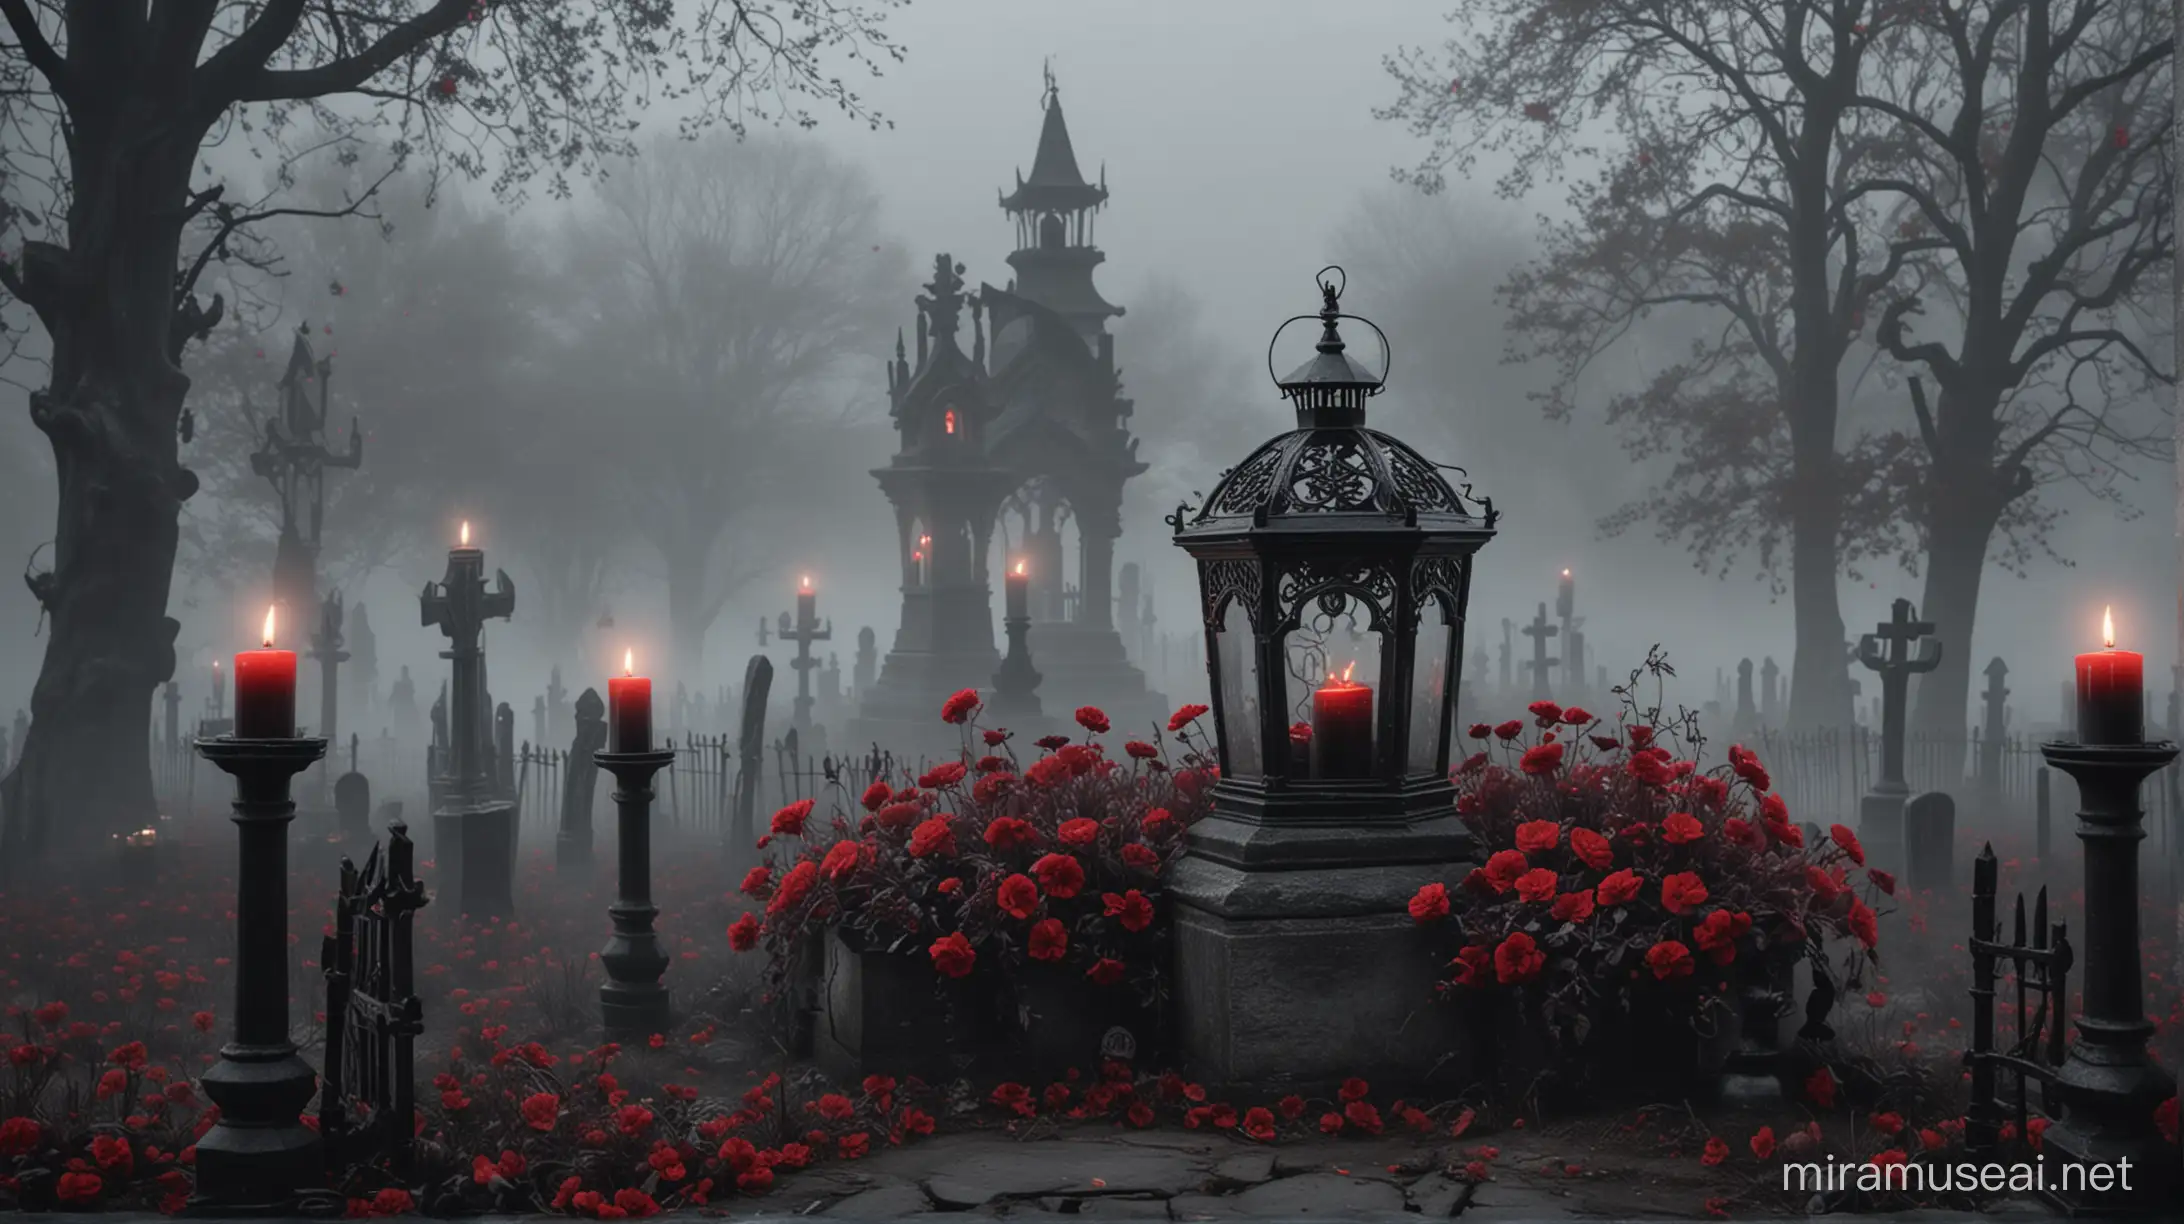 Eerie Haunted Cemetery with Gothic Lantern and Red Flowers